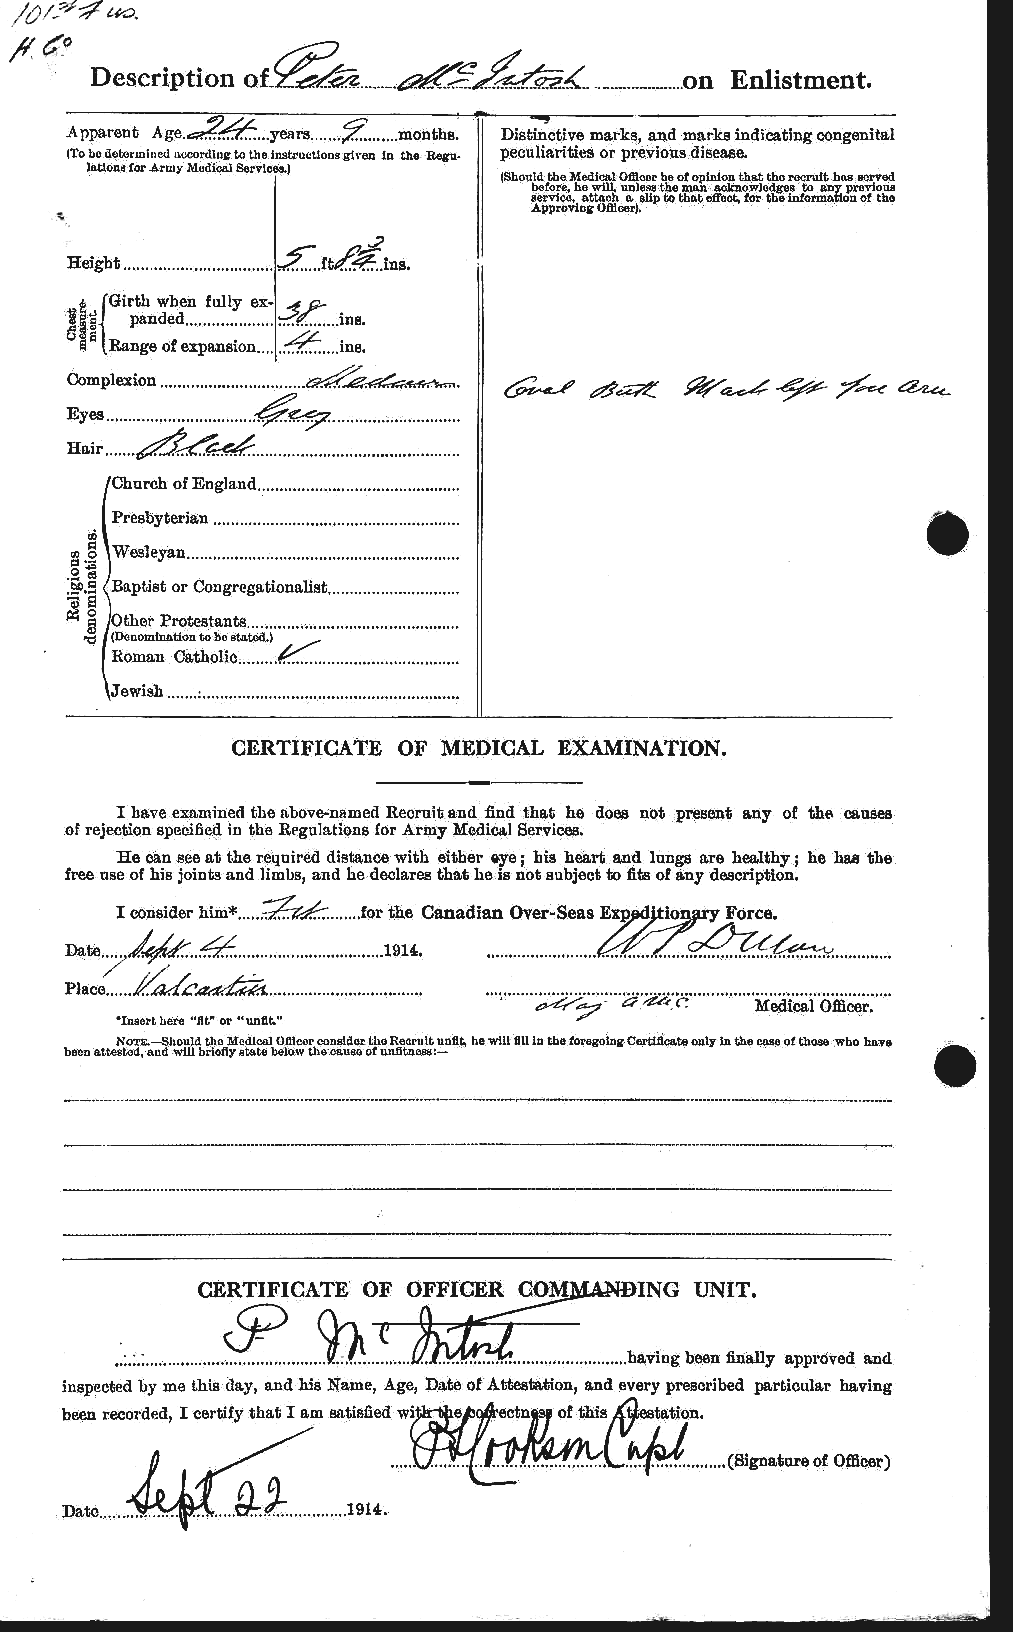 Personnel Records of the First World War - CEF 525699b